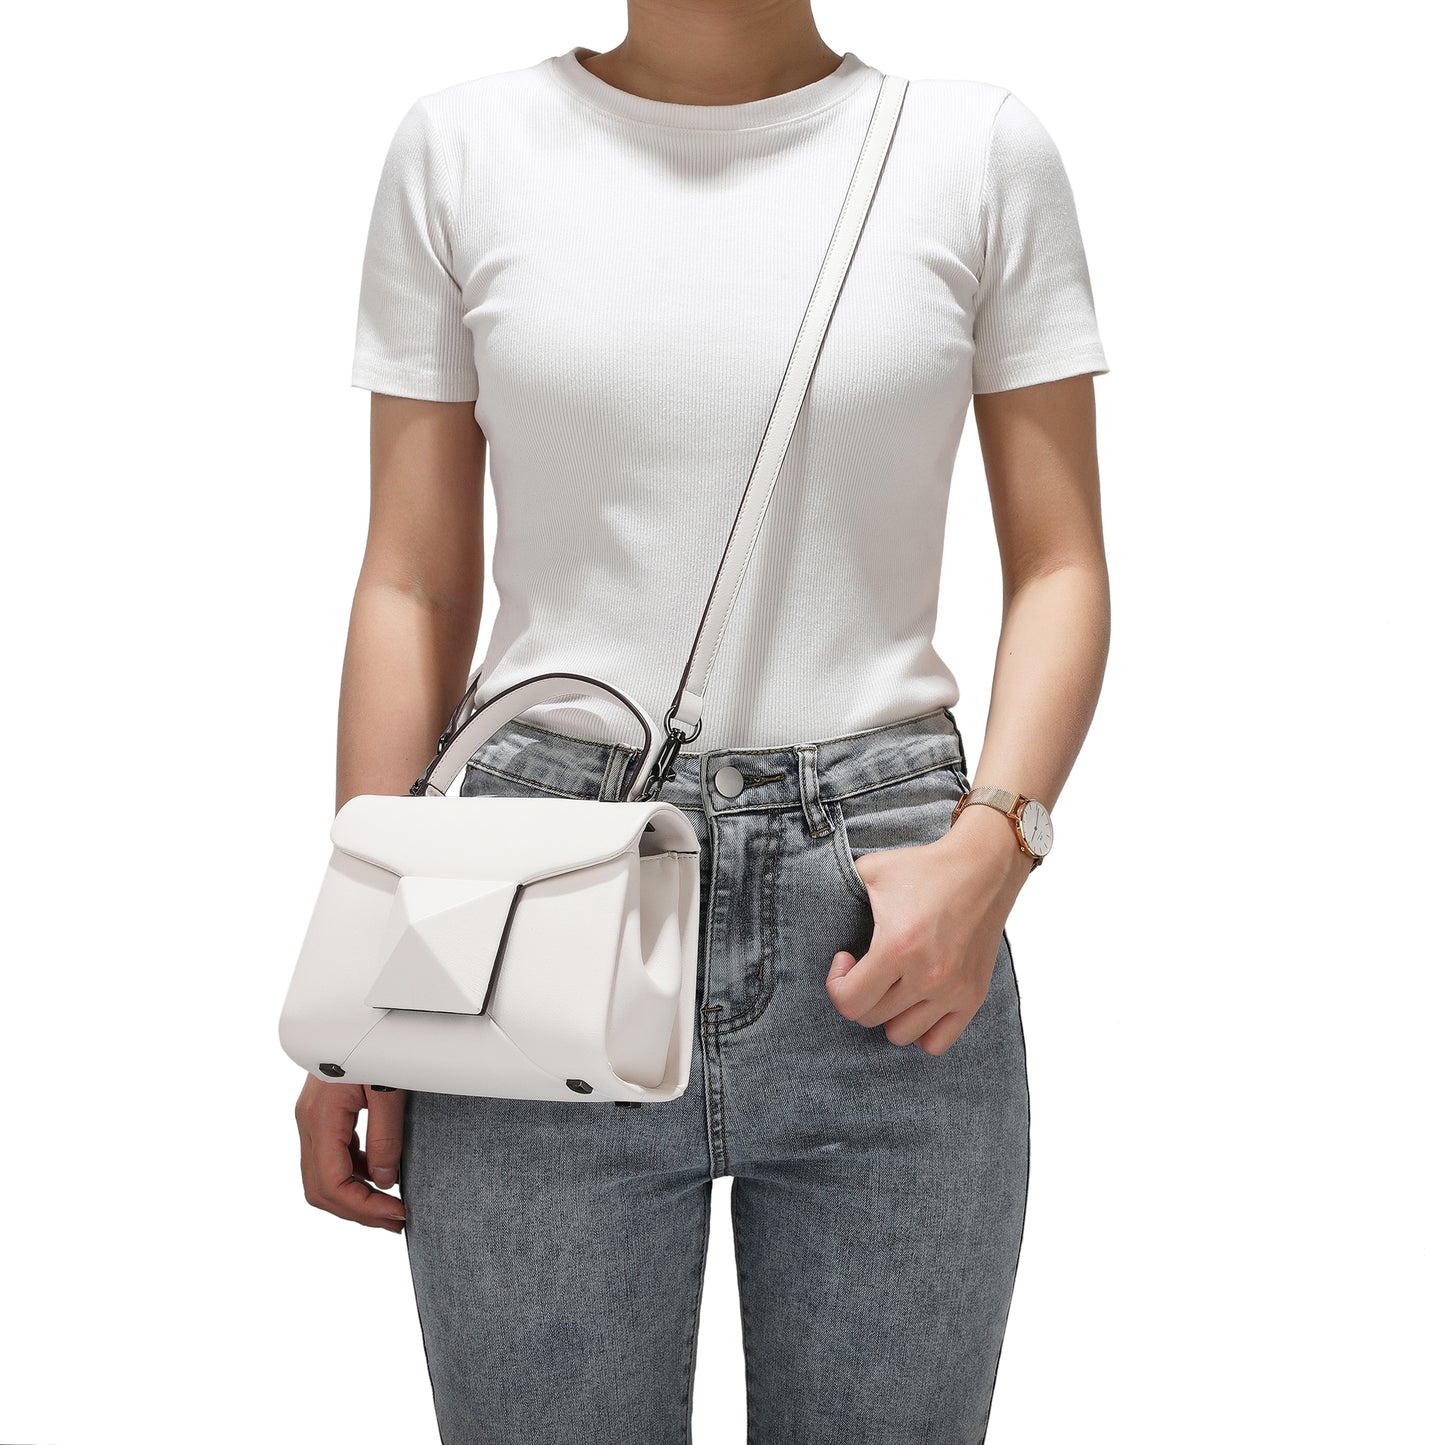 Tiffany & Fred Full-Grain Soft Leather Top-Handle